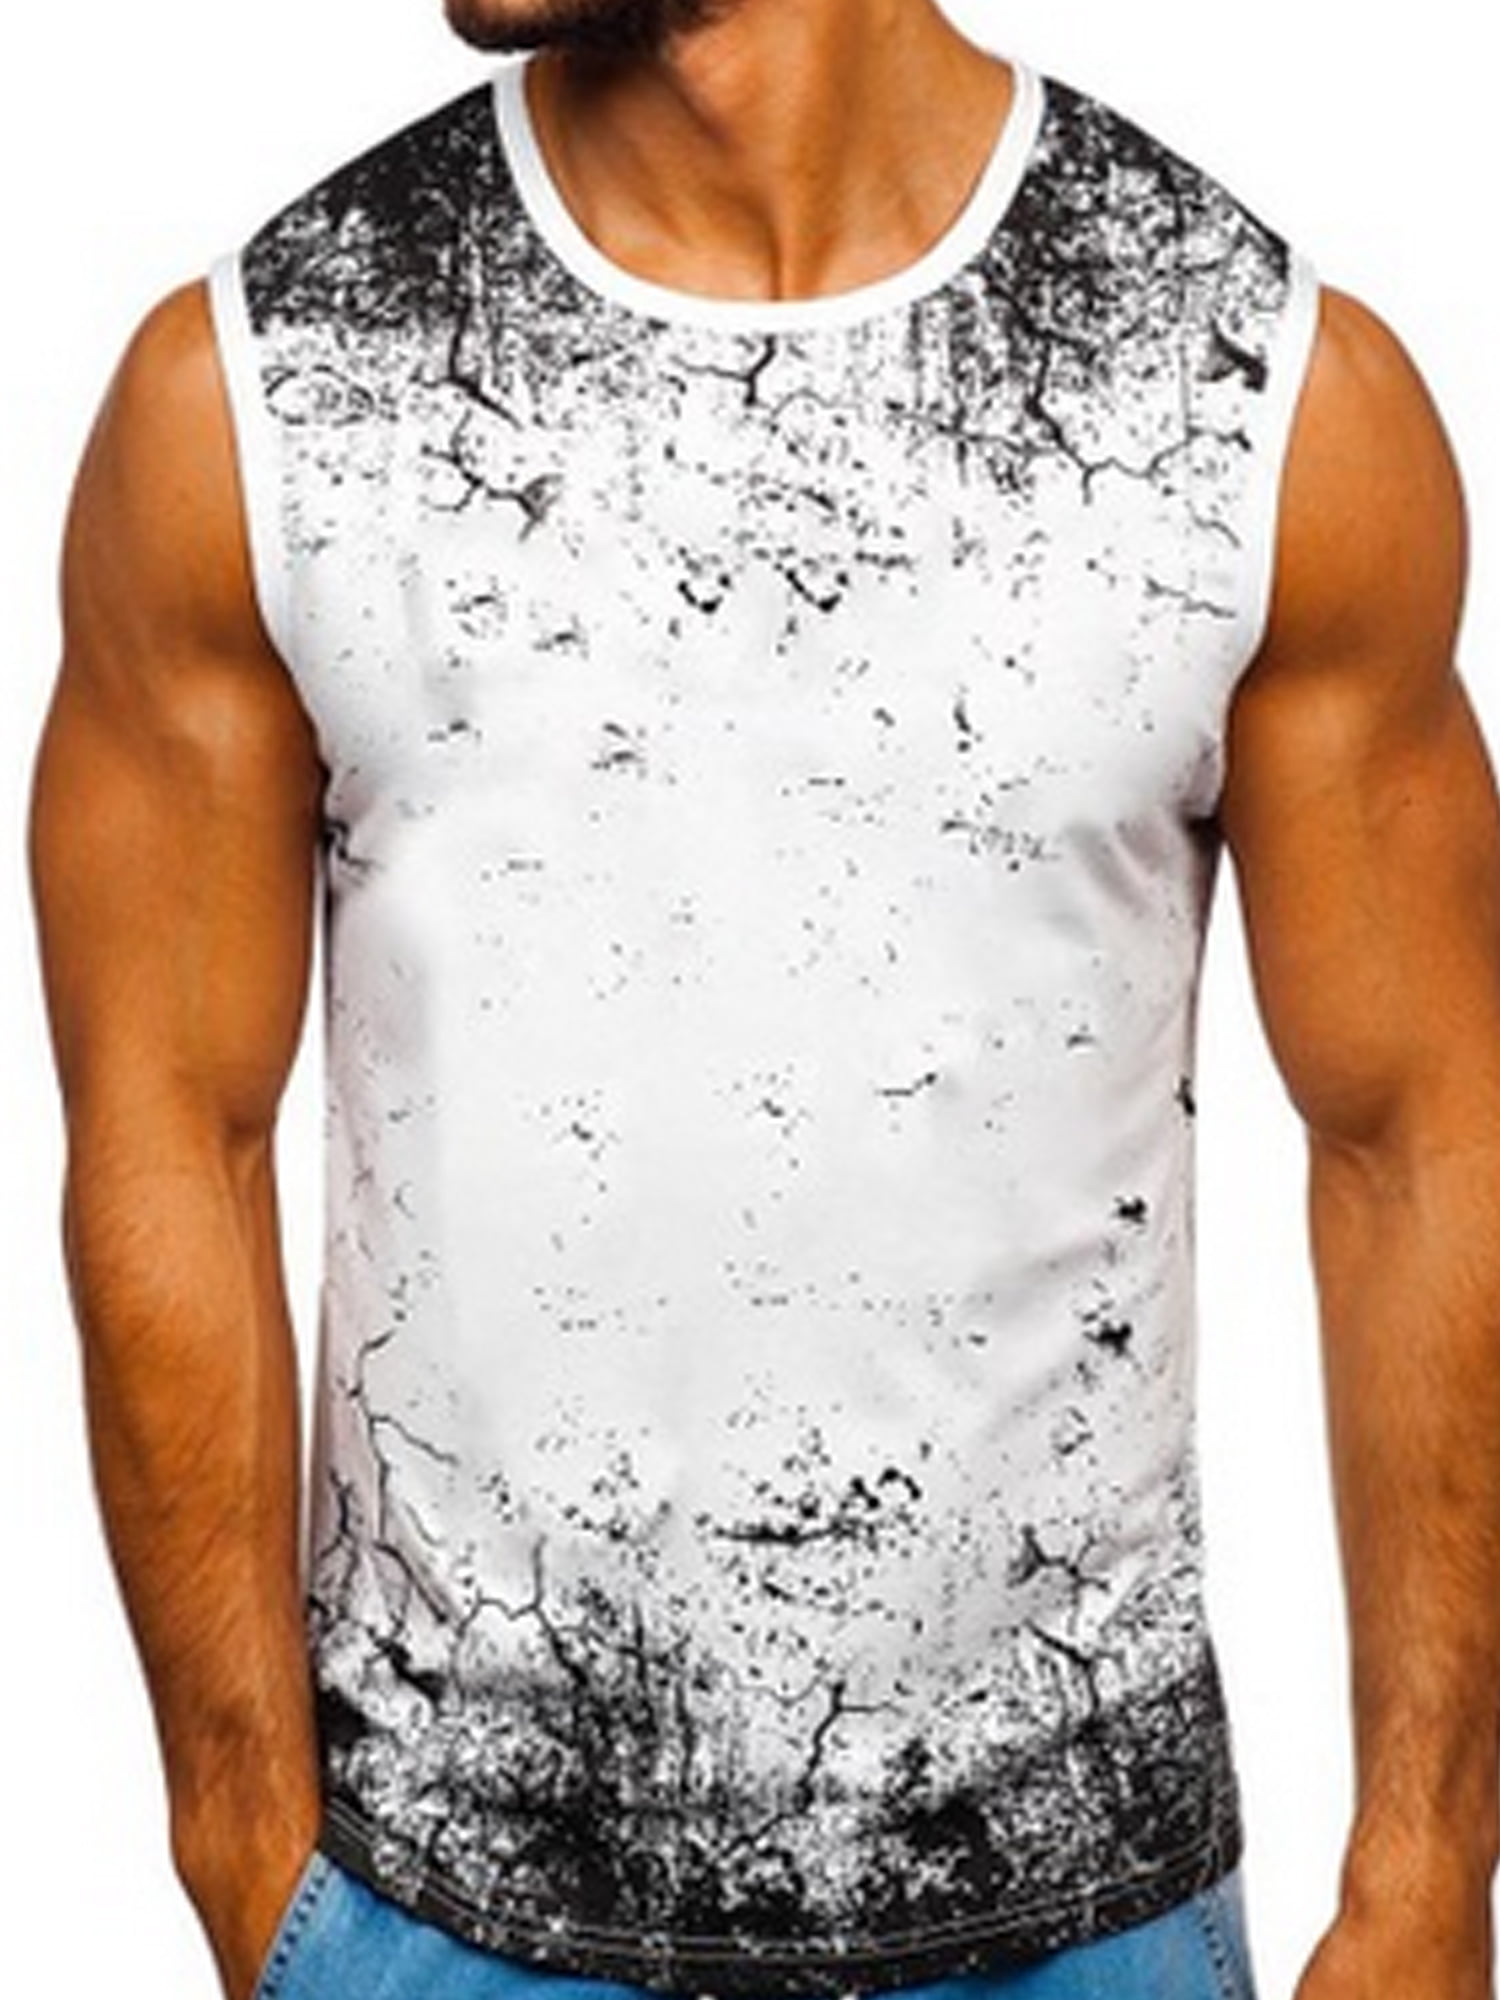 Hot!Men Tops Plus Size New Style O-Neck Solid Slim Comfortable Sleeveless Shirts Outdoor Leisure Sports Fitness Breathable Running Vest Top Blouse T-Shirt